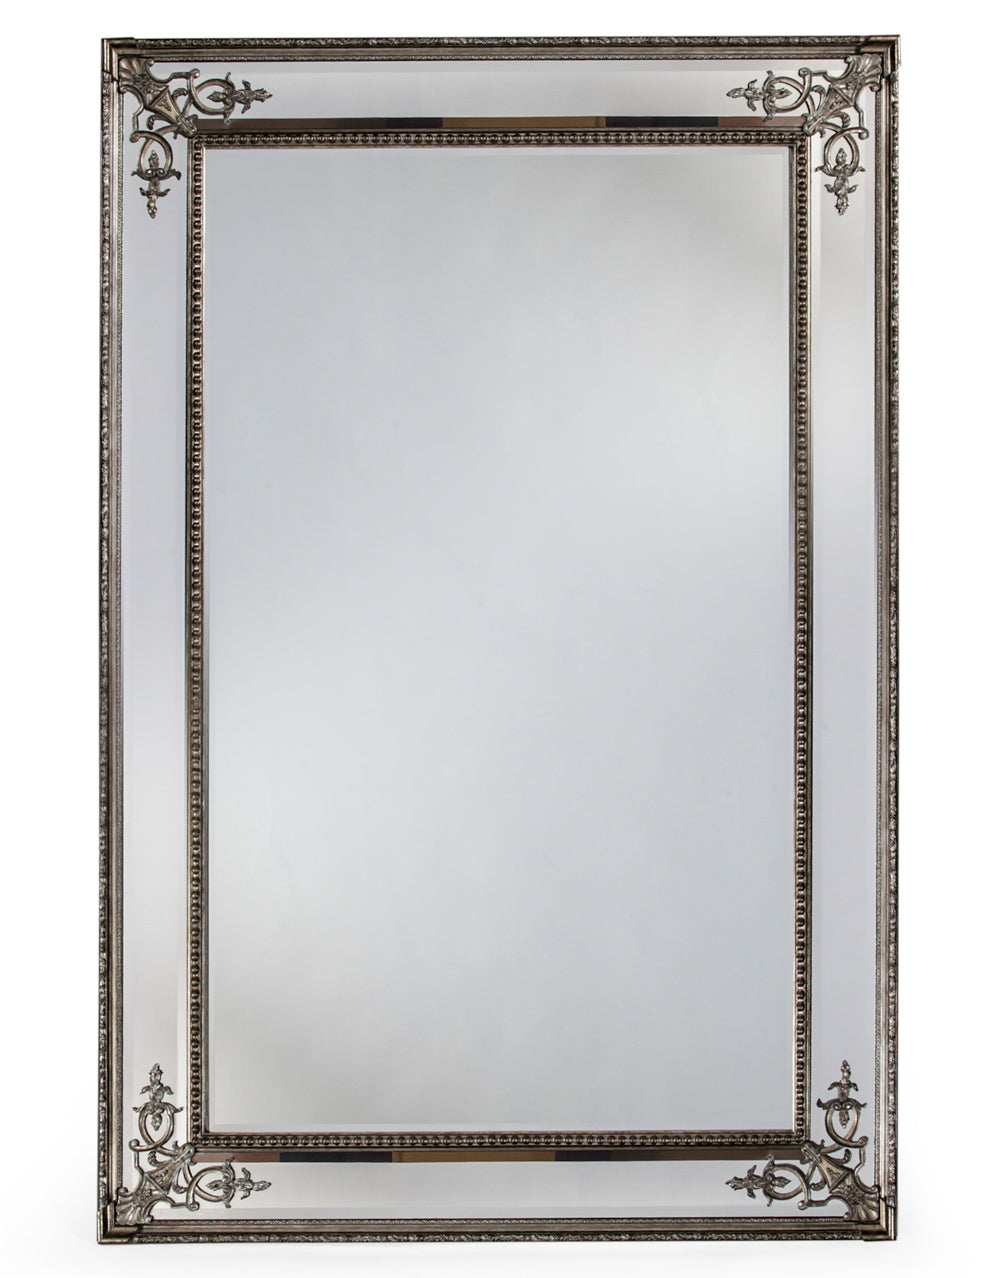 Large Silver French Mirror